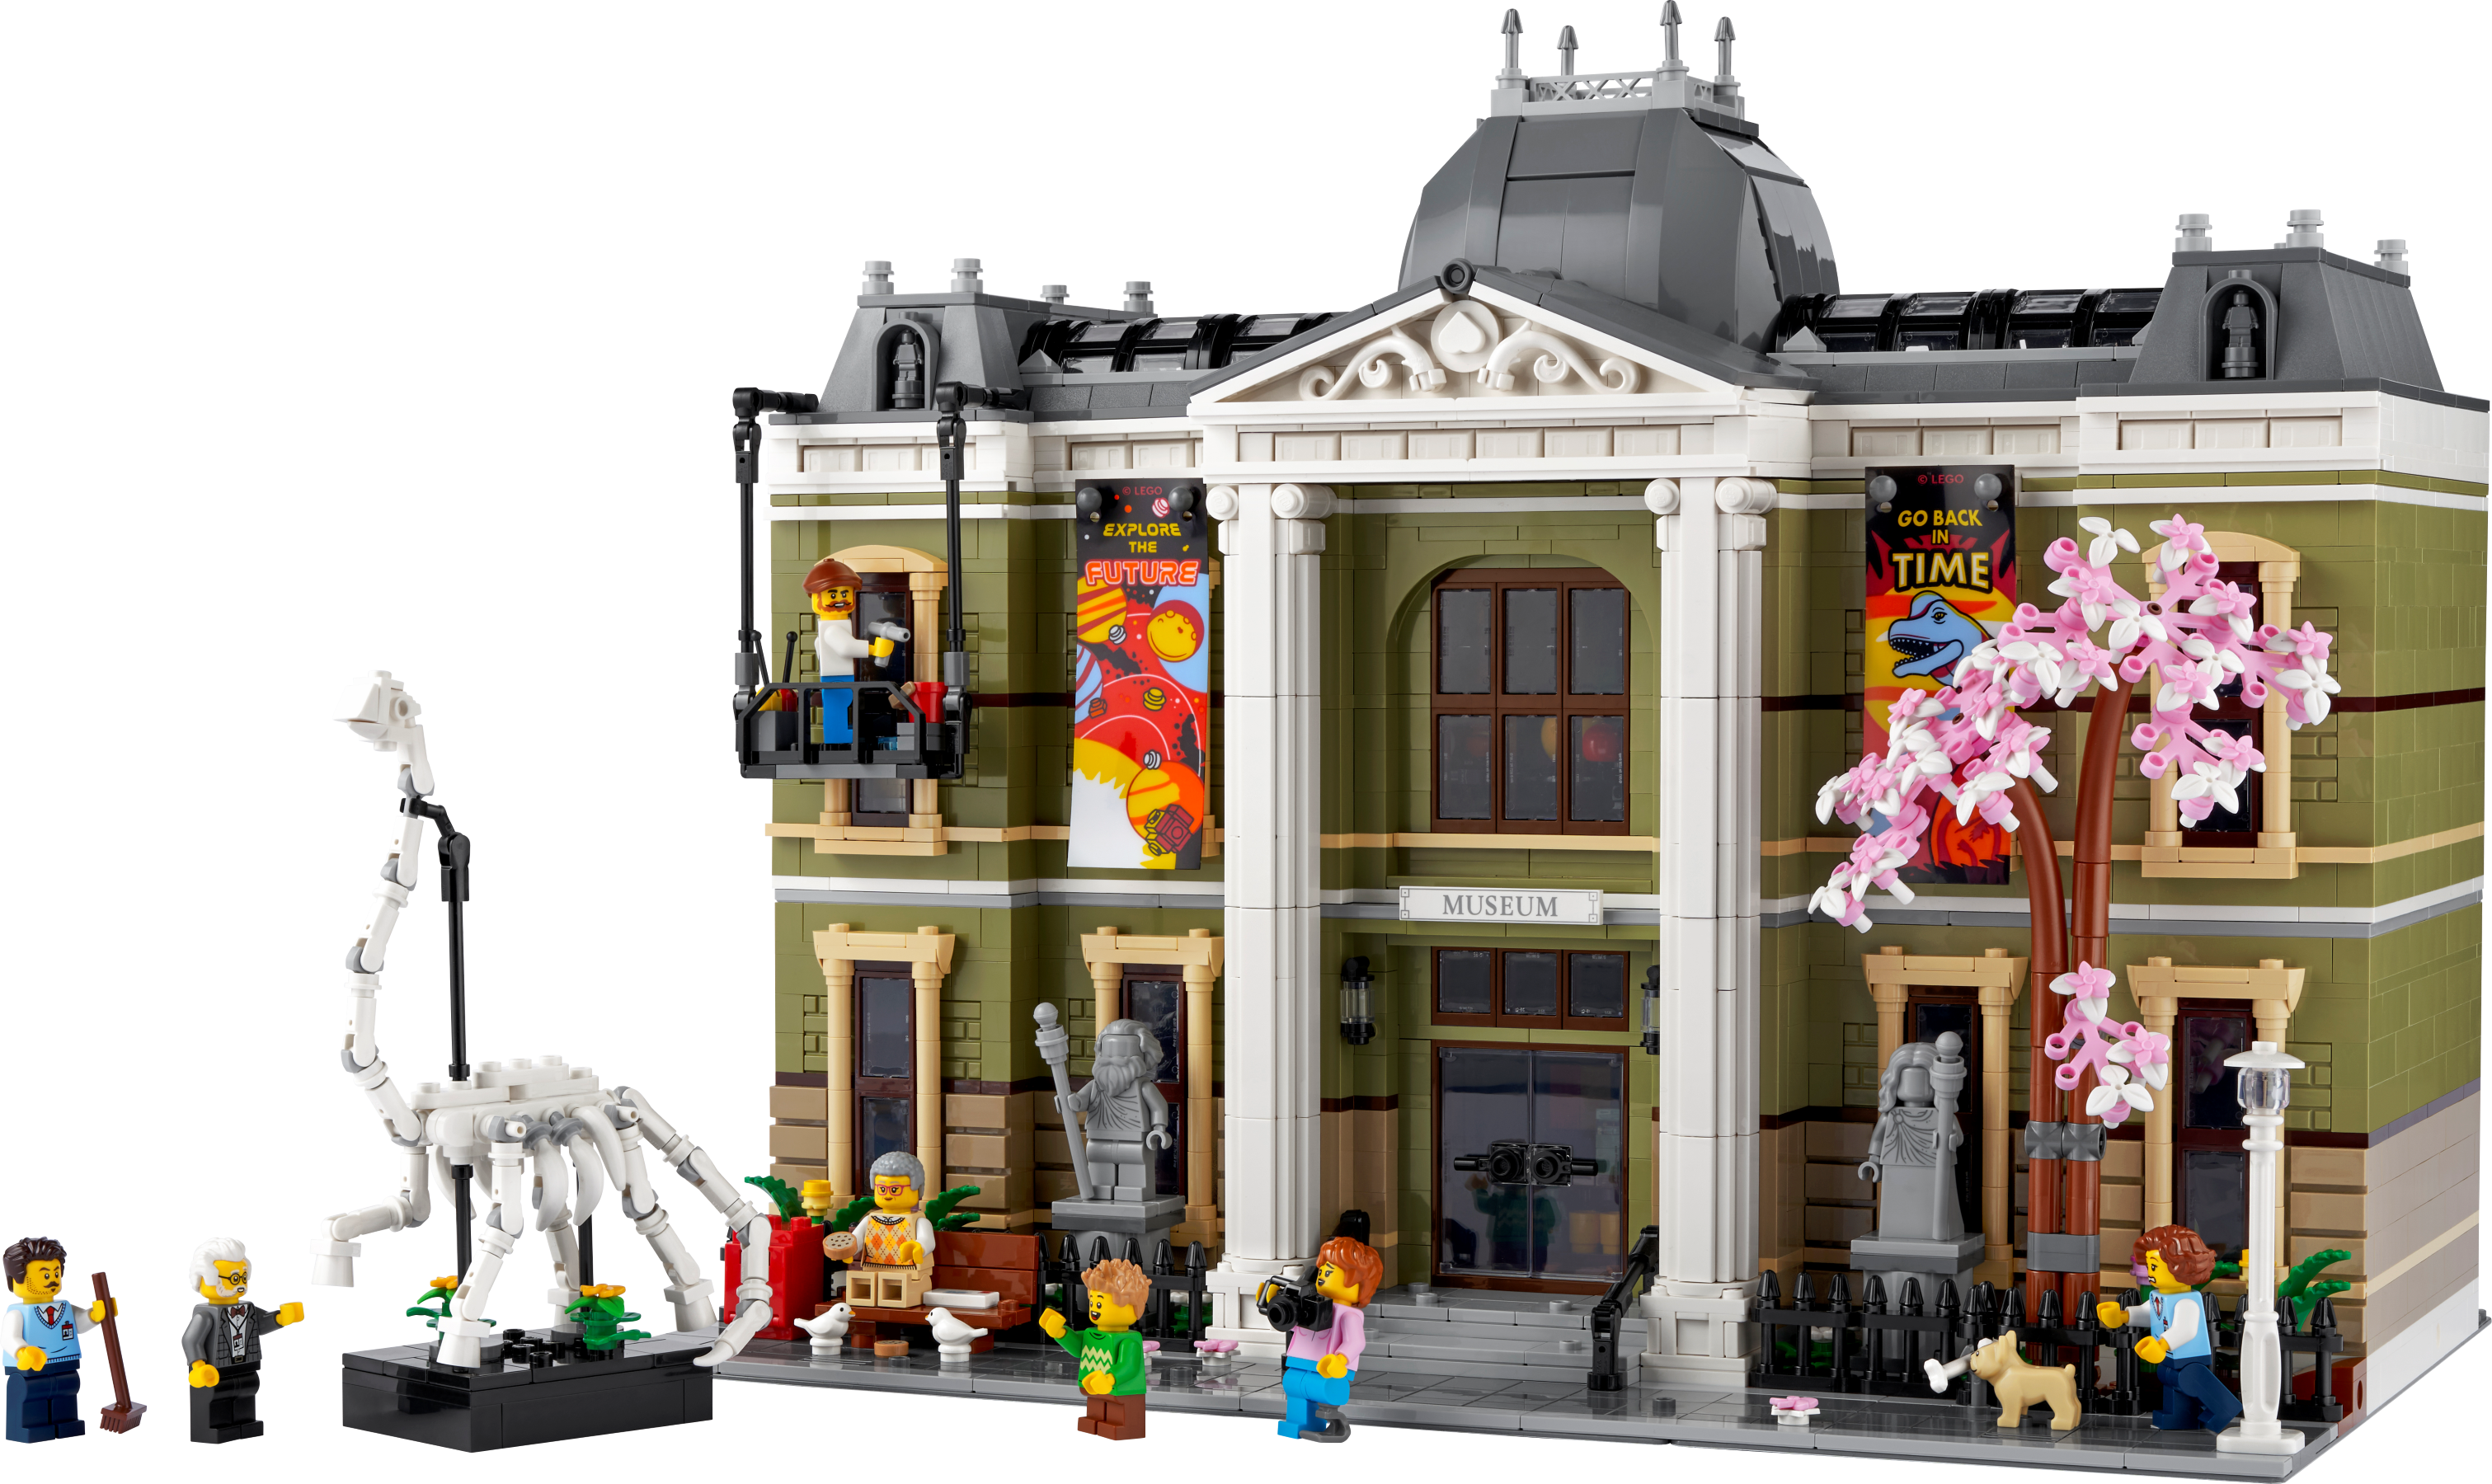 Natural History Museum 10326 | LEGO® Icons | Buy online at the Official  LEGO® Shop US